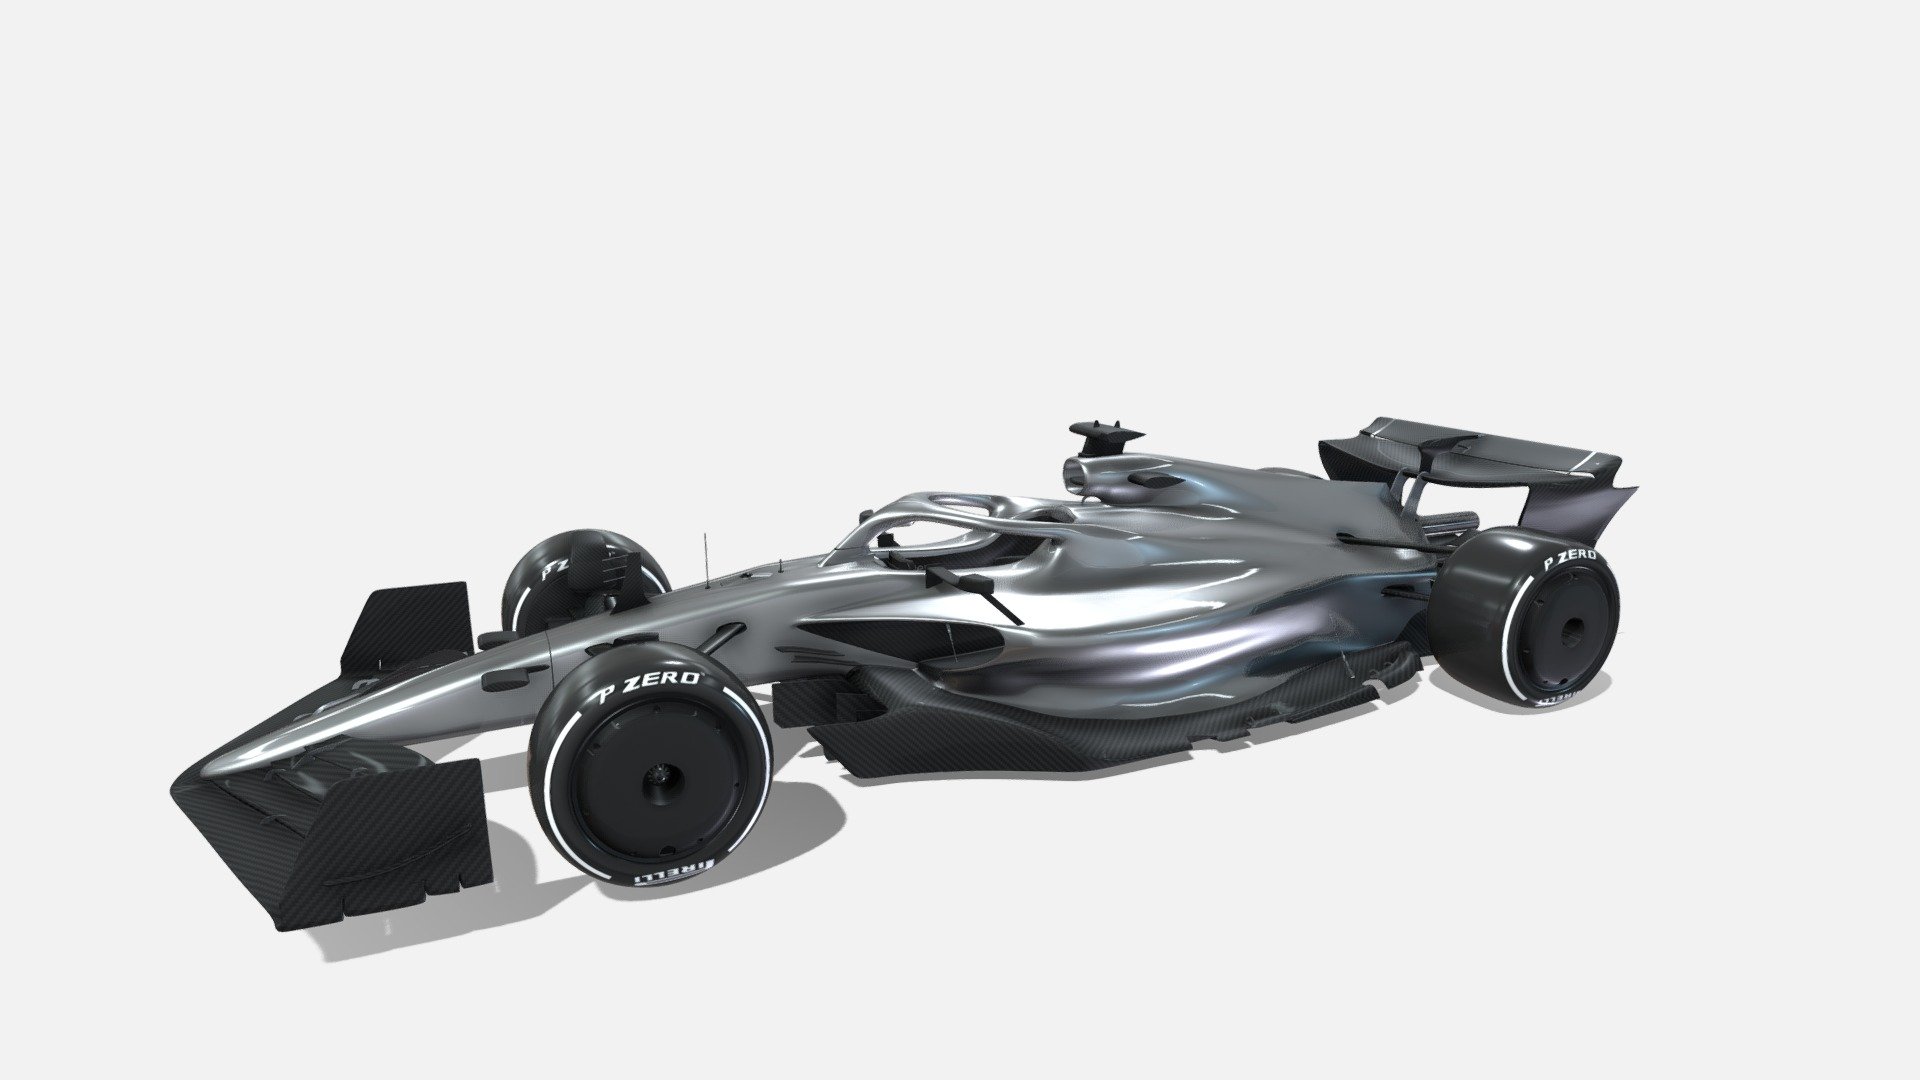 F1 2022 generic car. Inspired form FIA pictures. This is propably the last version, that will be uploaded. It still does not have a UV map for liveries. When the UV Map will be ready I will reupload it and set it free to download.


OBJ and PNG formats
2048px image quality 
High poly body
Engine turbo ext under the bodywork 
Real dimensions 18 inch wheels
Rims under wheelcovers
Easy to import &amp; animate
Made using blender 2.91
Textures made with photoshop CS6

NO DOWNLOAD YET

The car has been used for F1 2014 mod https://www.racedepartment.com/downloads/f1-2022-season-mod.48443/

More Generic cars are comming from all the eras.

Previous version: https://skfb.ly/ownFr - F1 2022 Generic Final - 3D model by TheoDevF1 (@TheoDevF12) 3d model